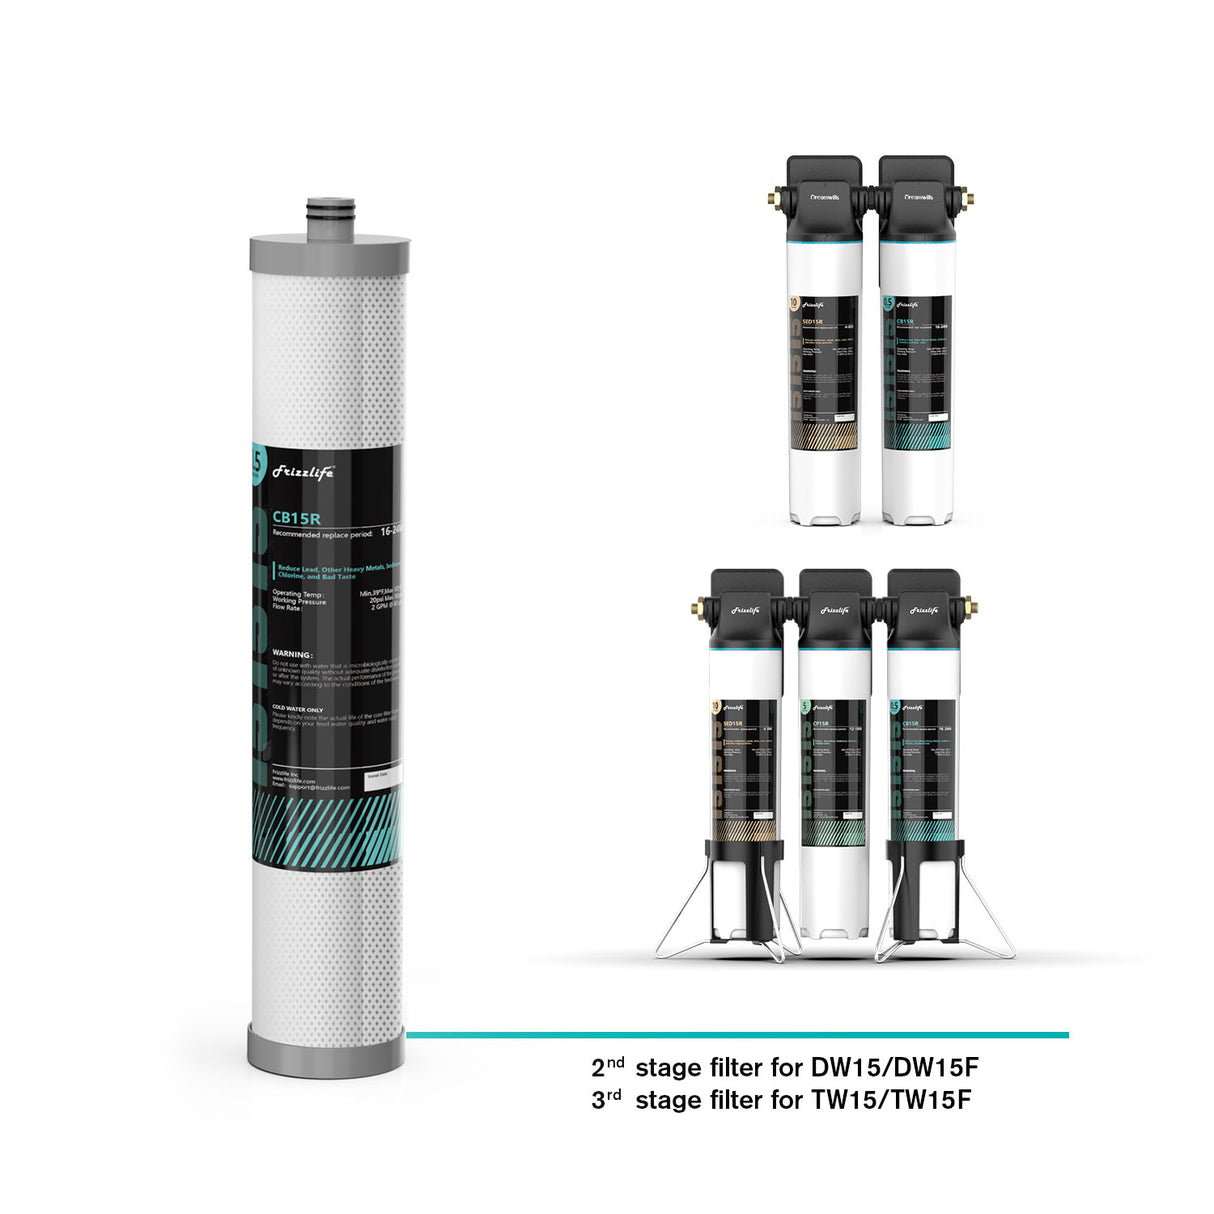 Frizzlife CB15R Replacement Filter Cartridge for DW15, TW15, DW15F, TW15F Under Sink Water Filters